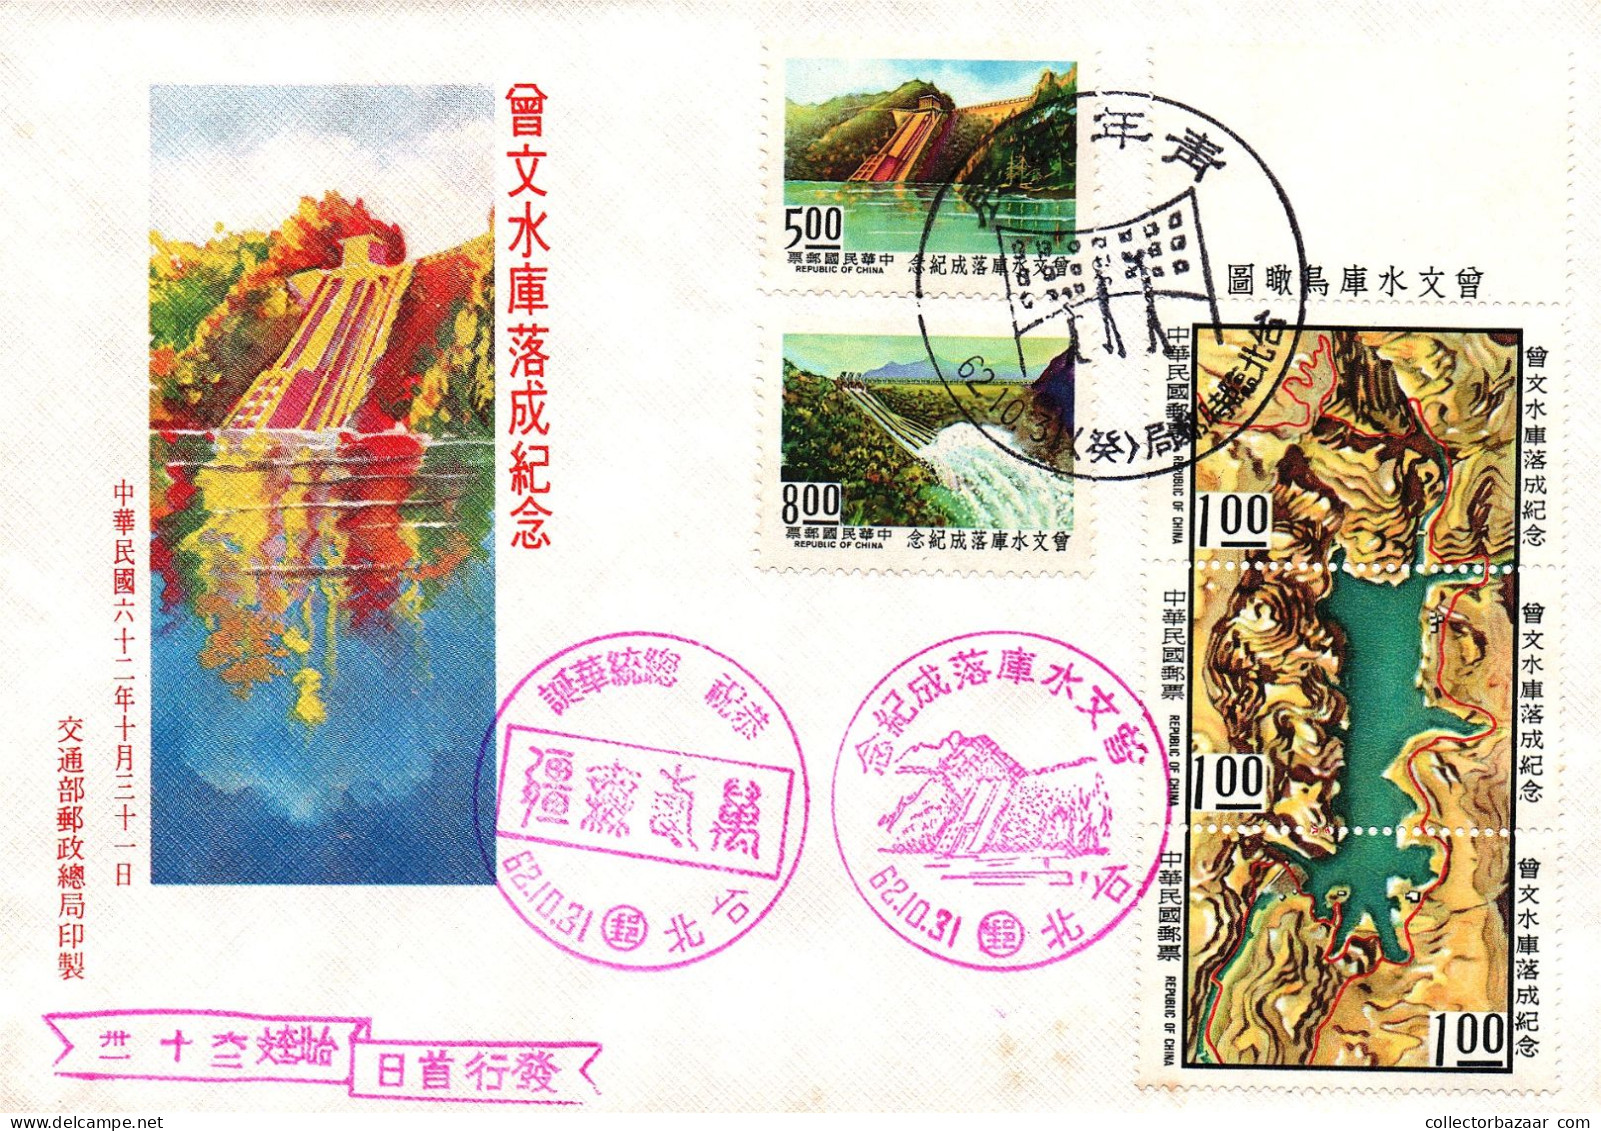 Taiwan Formosa Republic Of China FDC Art Paintings Drawings Landscape Mountains Sea- 8$,5$,1$,1$ And 1$ Stamps - FDC